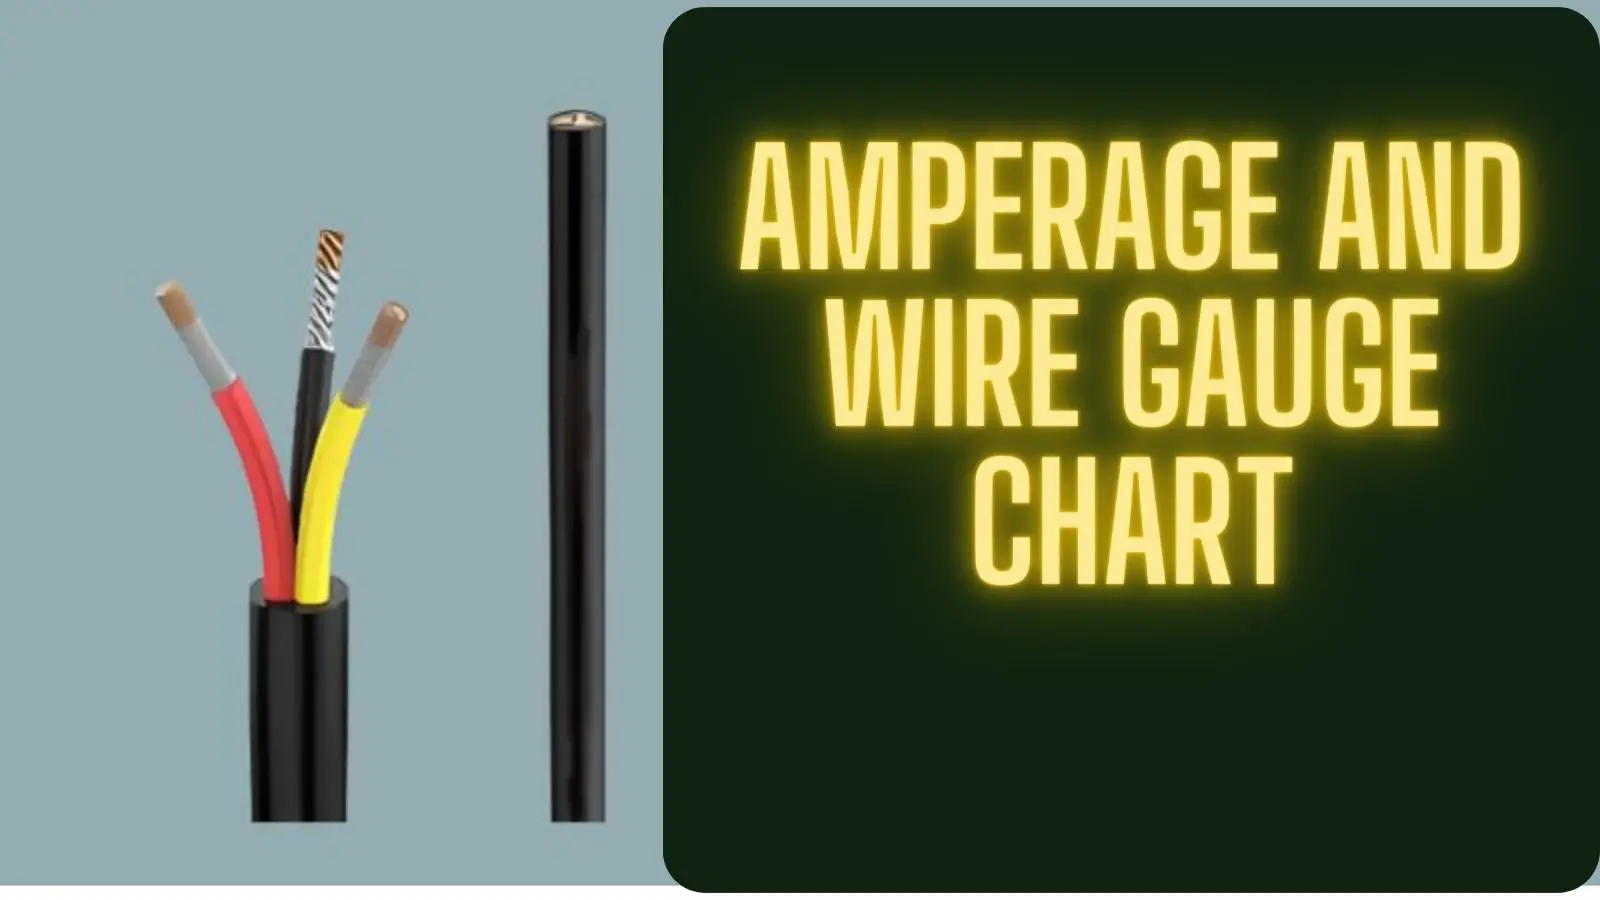 Amperage and Wire Gauge Chart